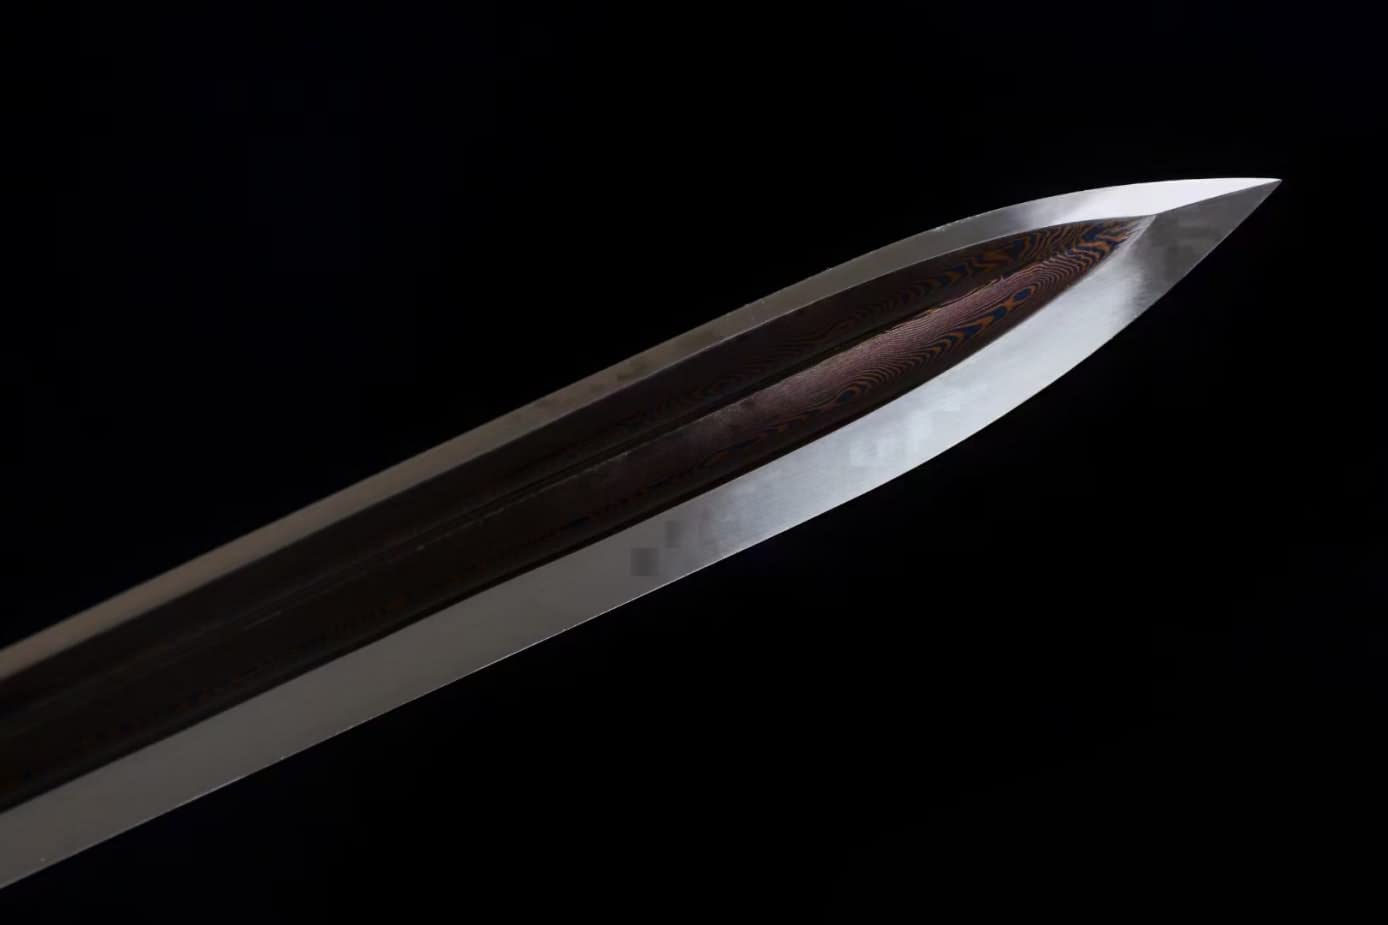 Dragon Spear,Forged Damascus Steel Spearhead,Rosewood Rod,Kung fu